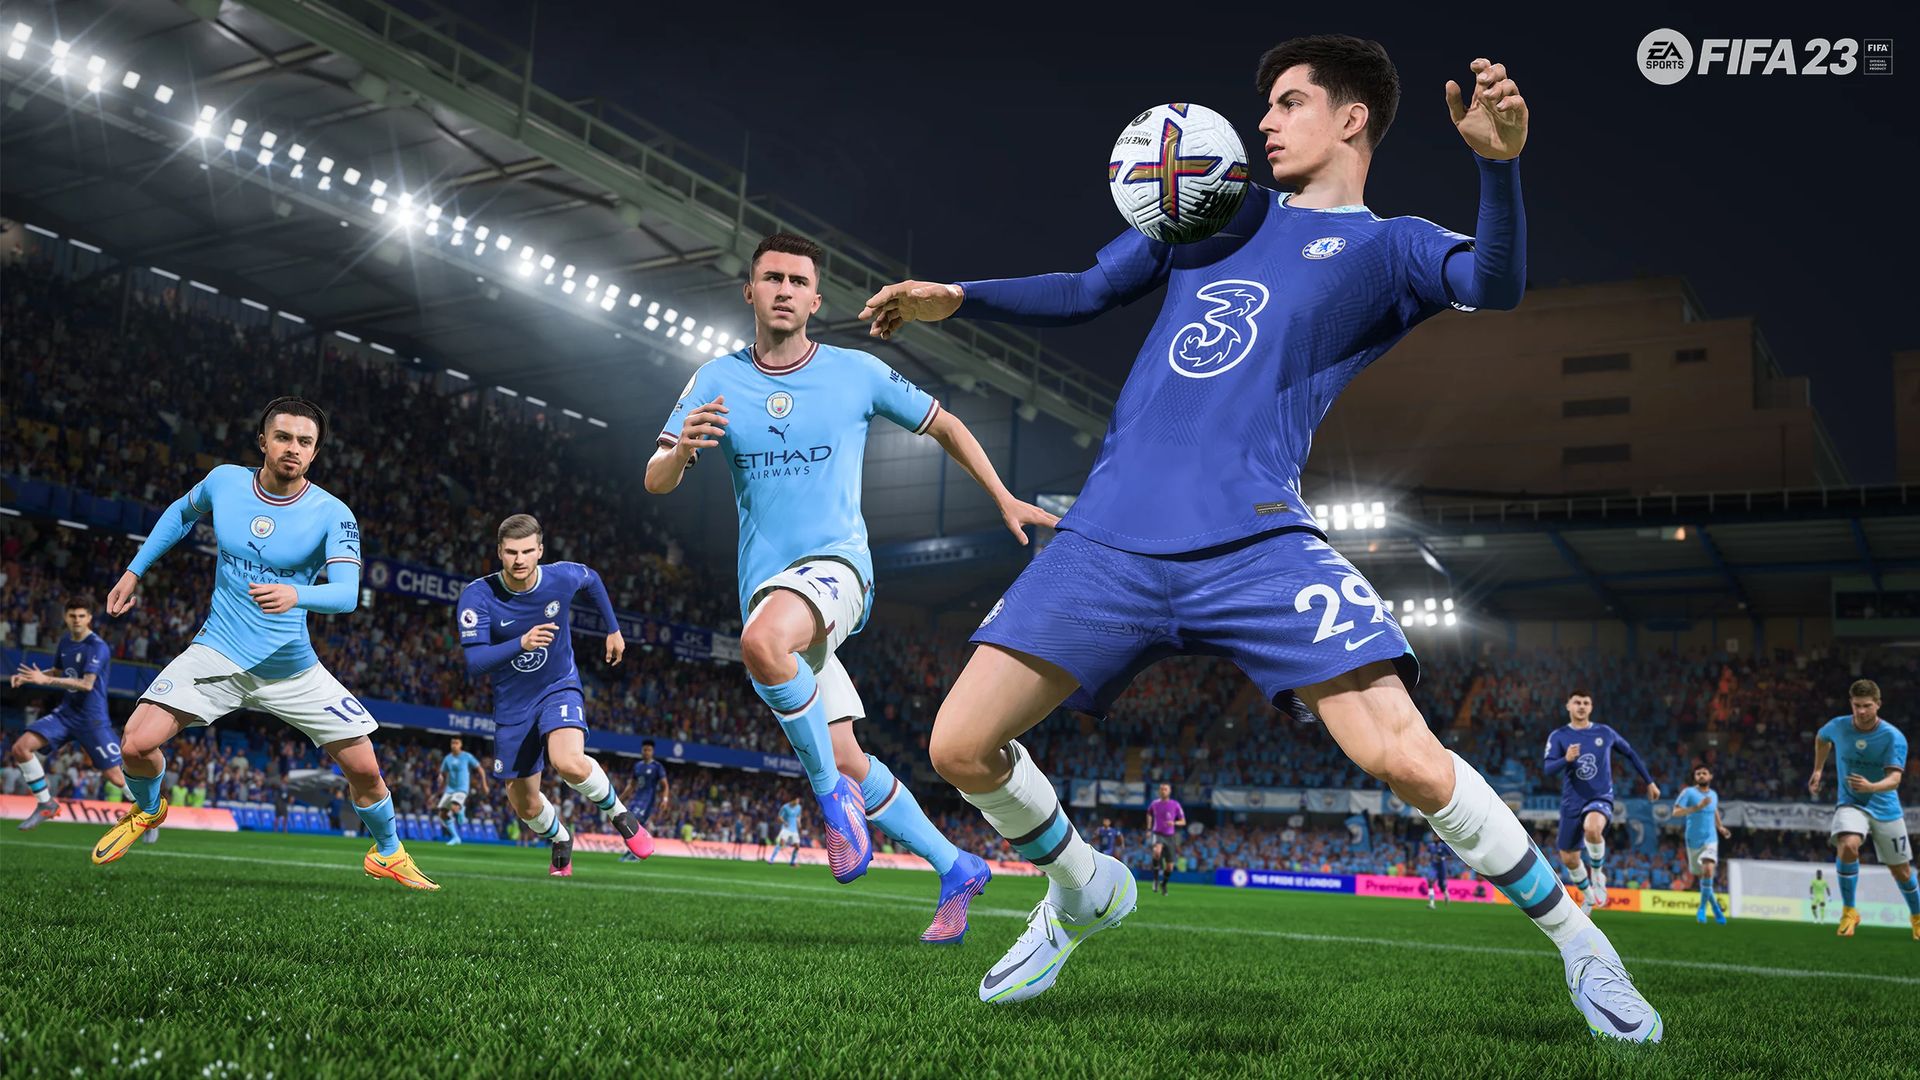 Before the game's release, FIFA 23 ratings have been revealed. This is a list of the top 50 players you can anticipate finding in the game.